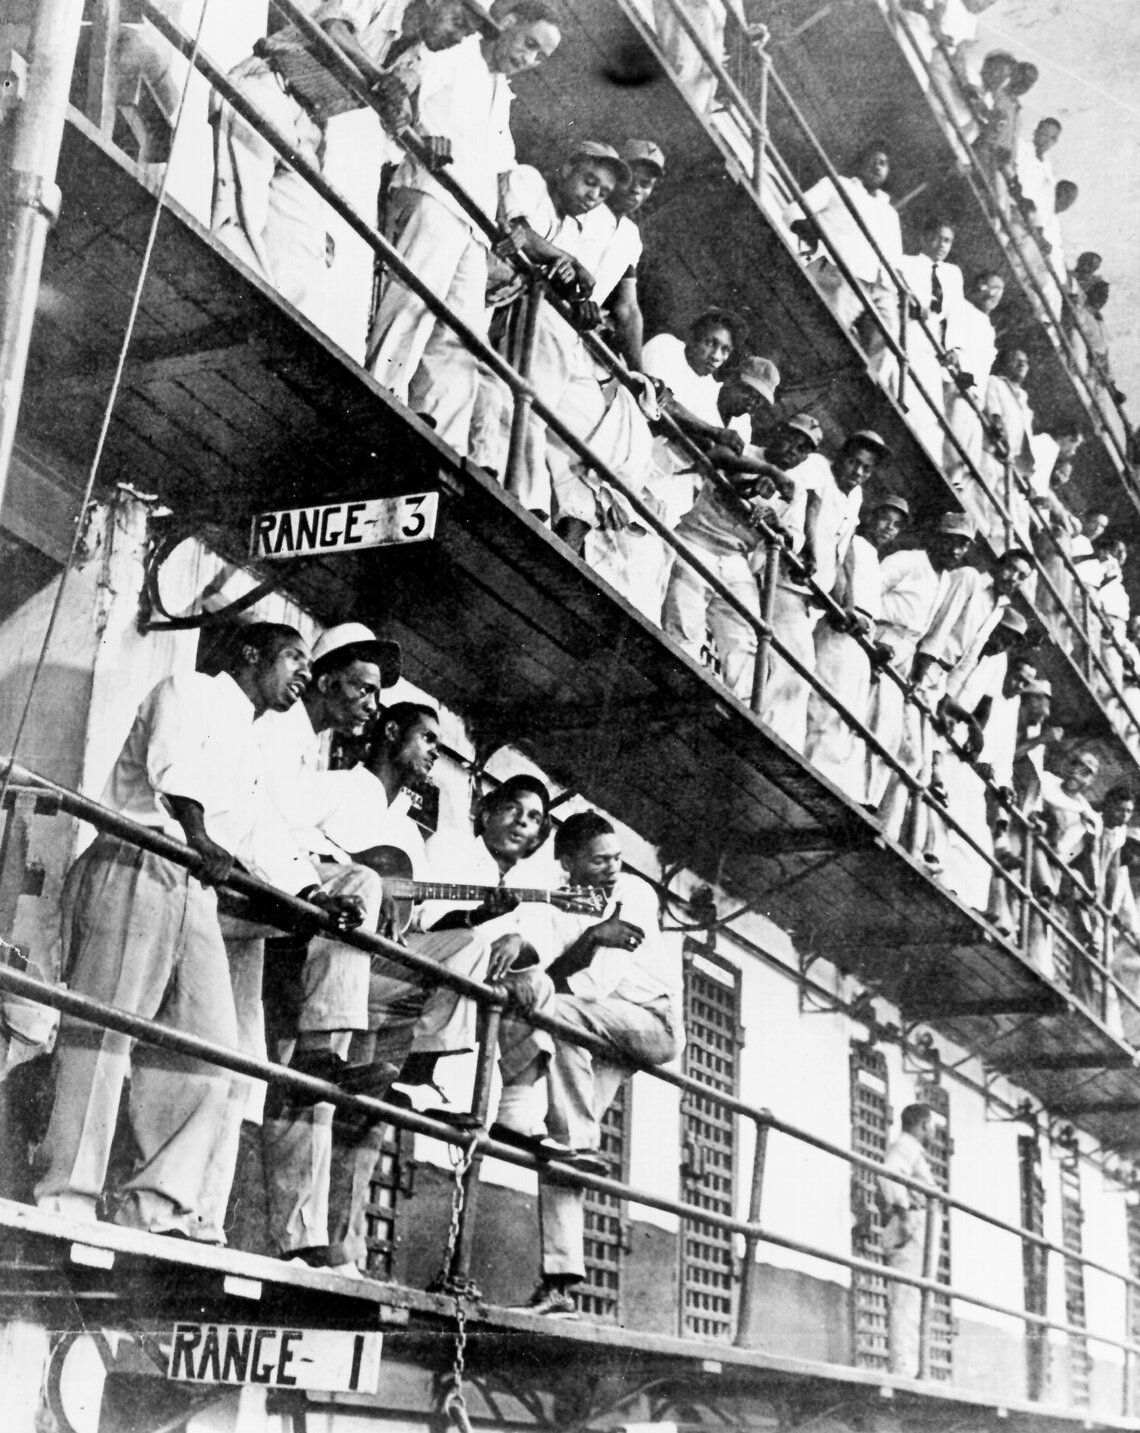 Five members of the singing group The Prisonaires lean against the railing of a balcony in a prison hall. One of the musicians is holding a guitar while the other men sing around him. On increasingly higher balconies above the group, prisoners peer over the edge of the railings, watching the performance.